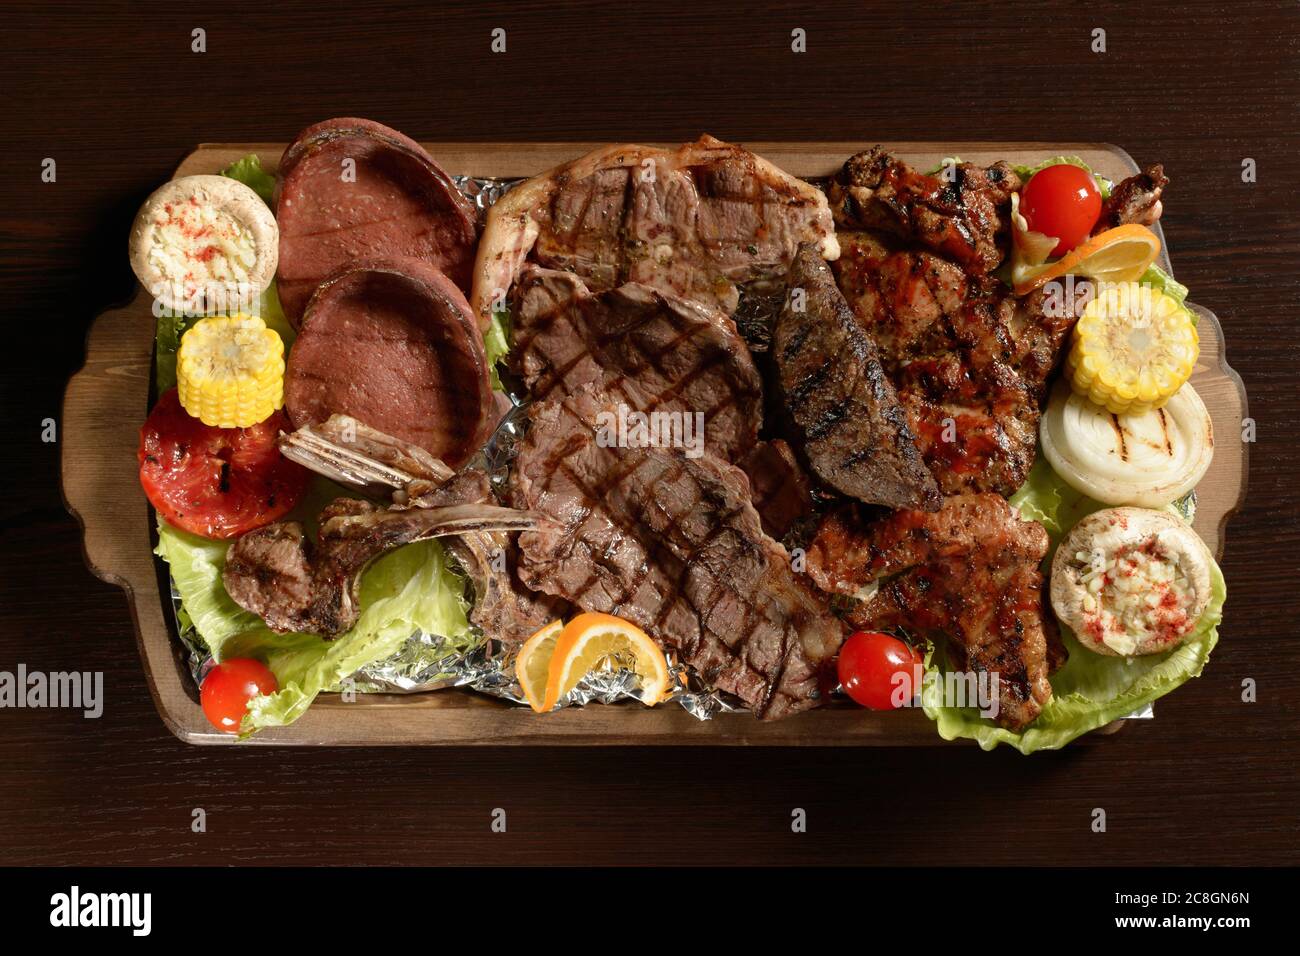 Assortment of grilled meat with vegetables on a rustic tray and wooden table Stock Photo